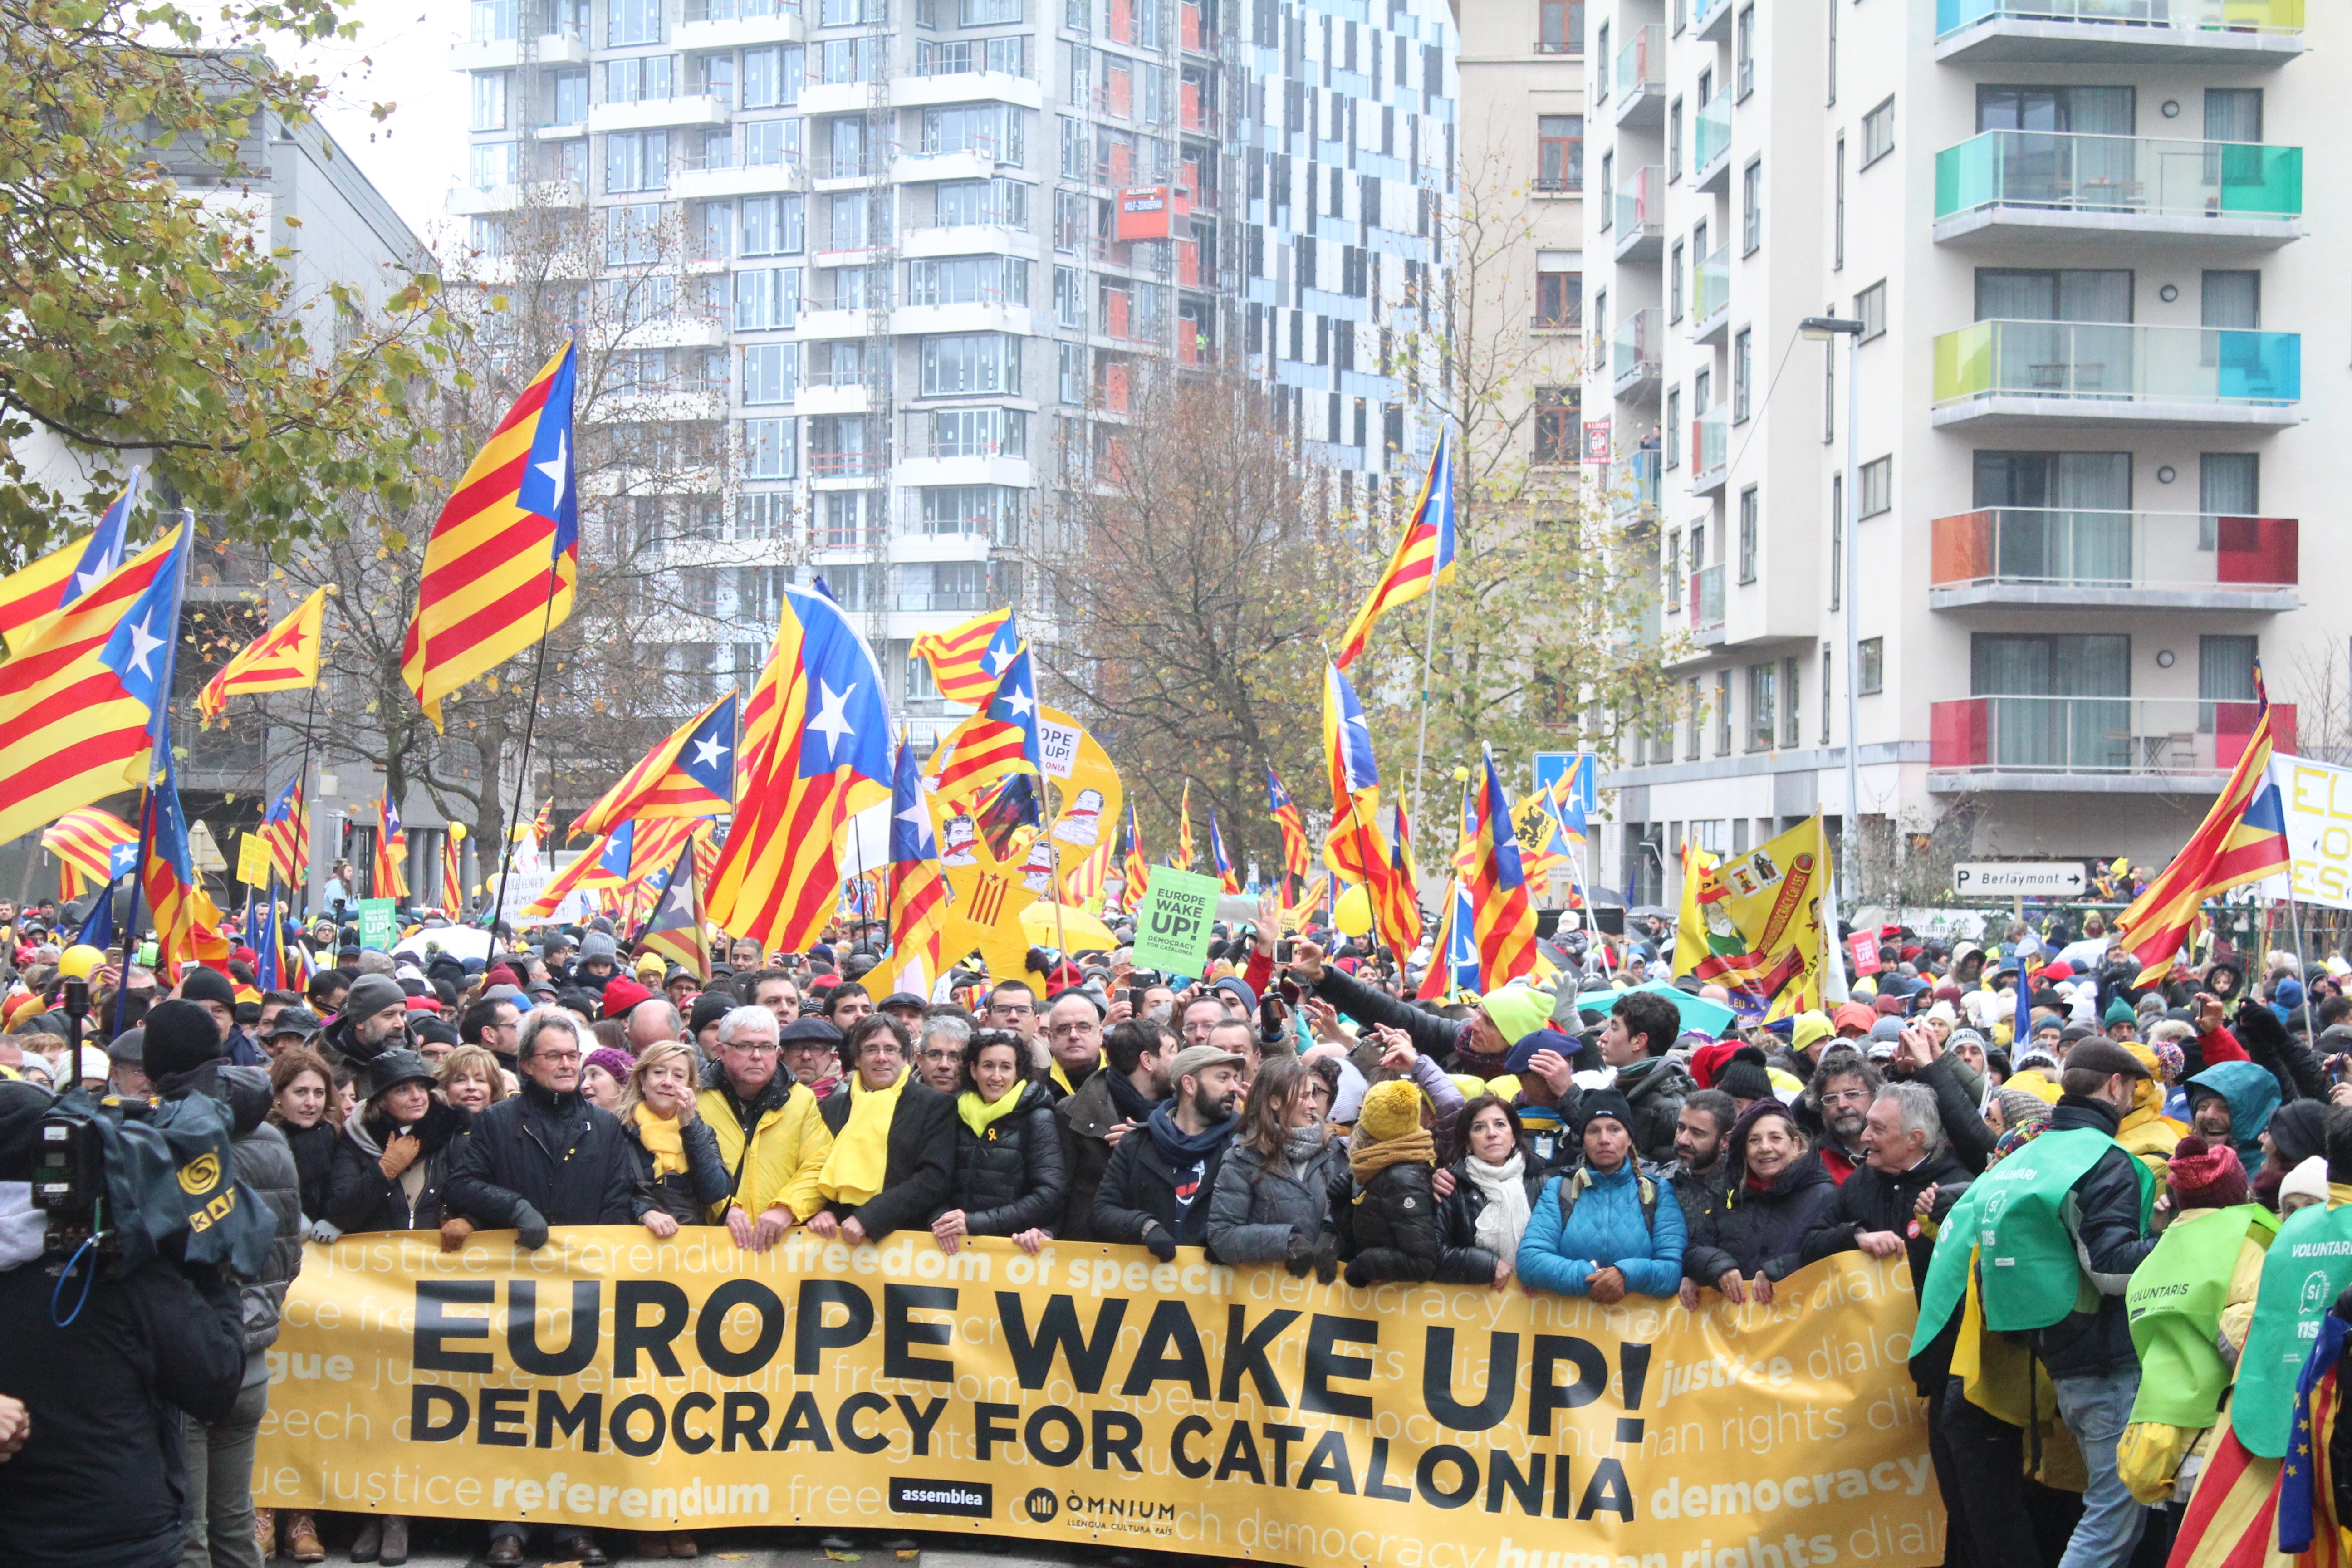 Catalan independence supporters overflow Brussels